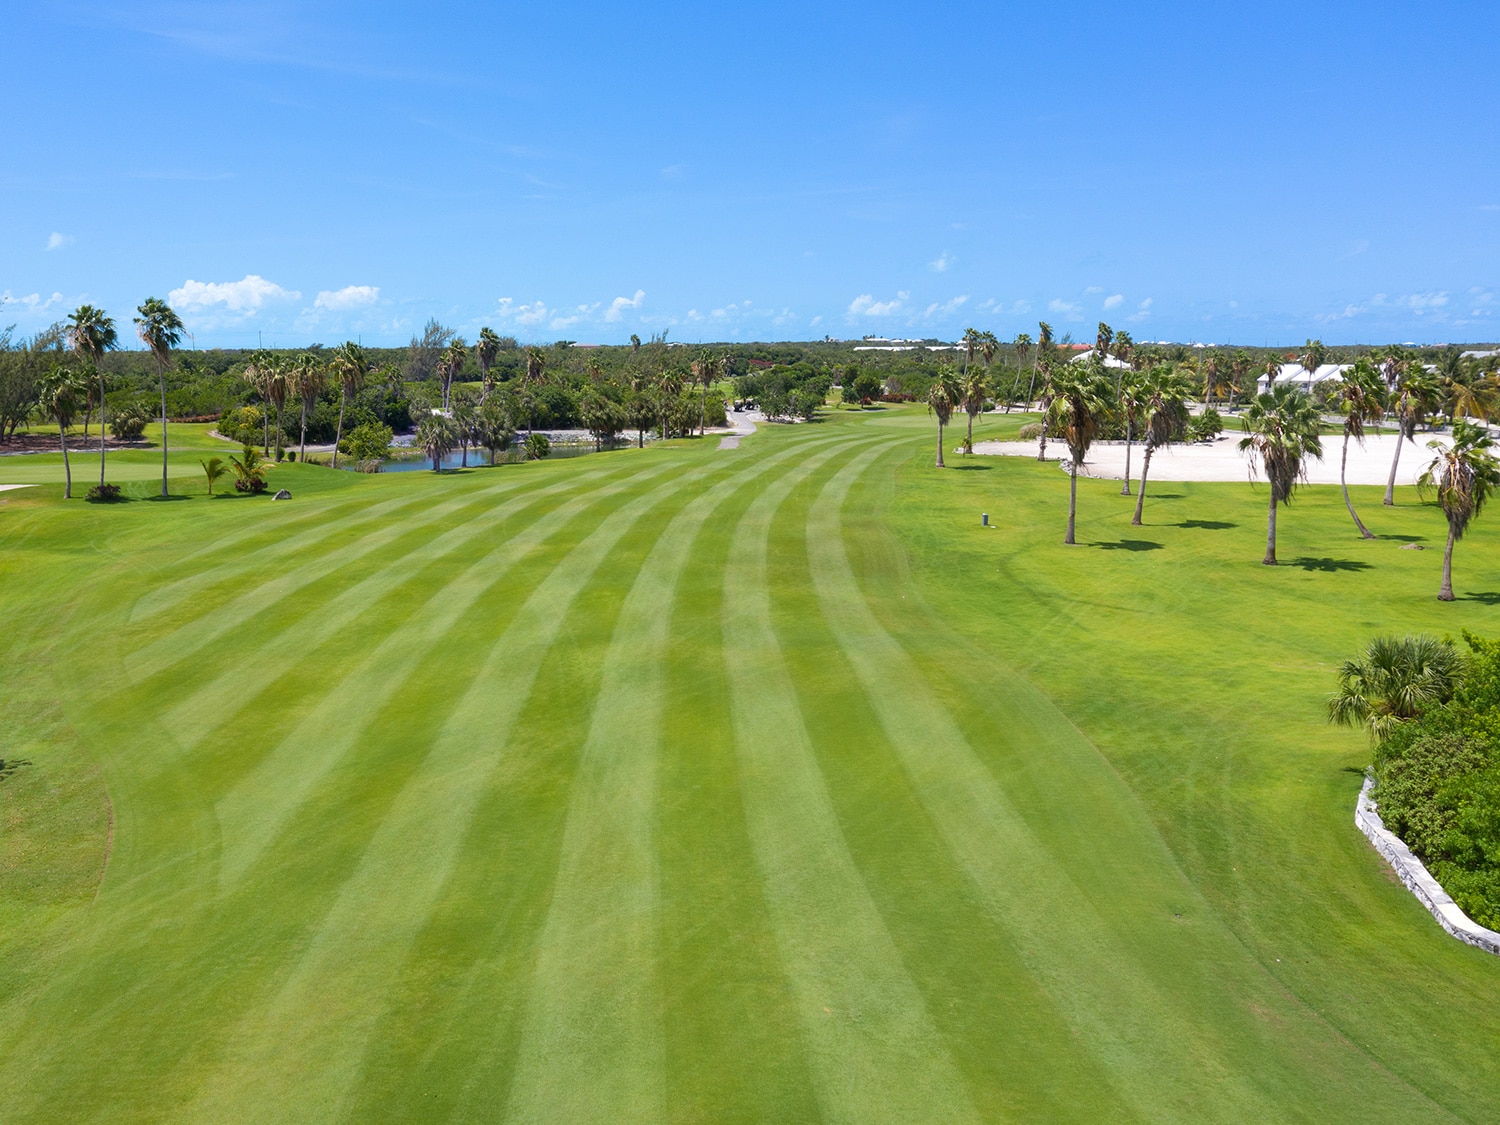 An aerial view of the fairway on Hole 10 at Royal Turks and Caicos Golf Club.